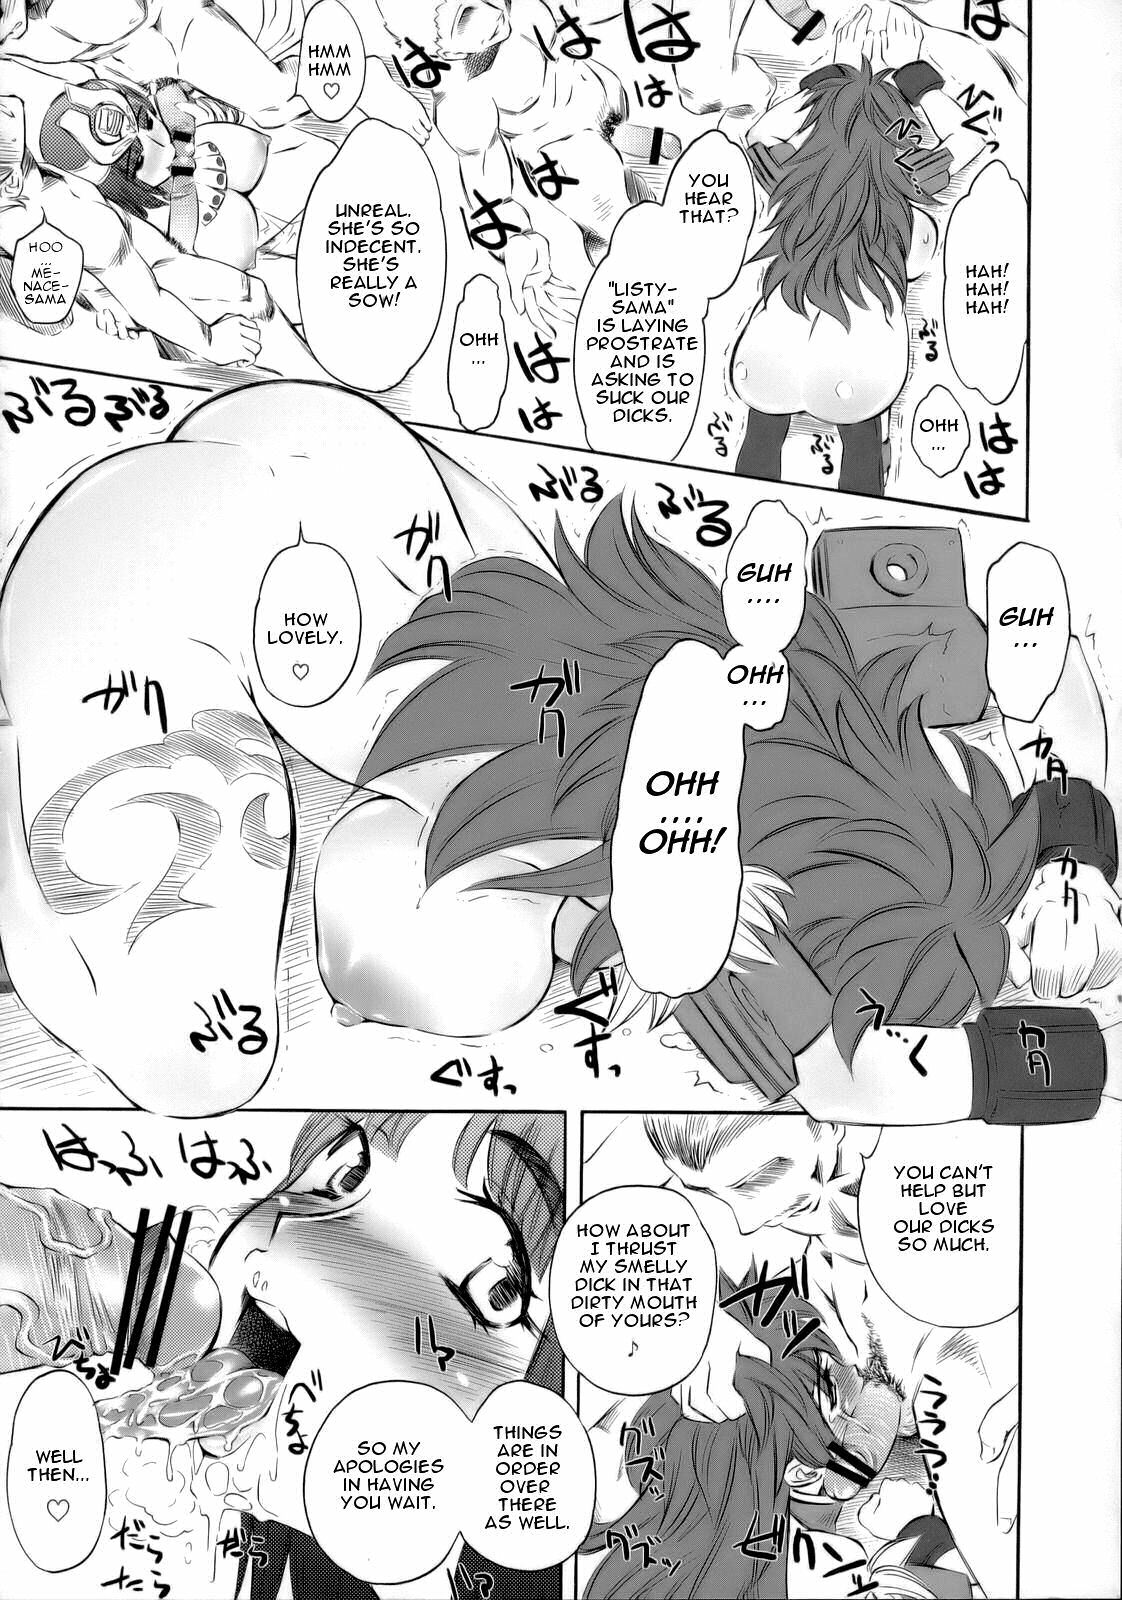 (C71) [Hi-PER PINCH (Clover)] Kitto Motto QB (Queen's Blade) [English] [One of a Kind Productions] page 10 full